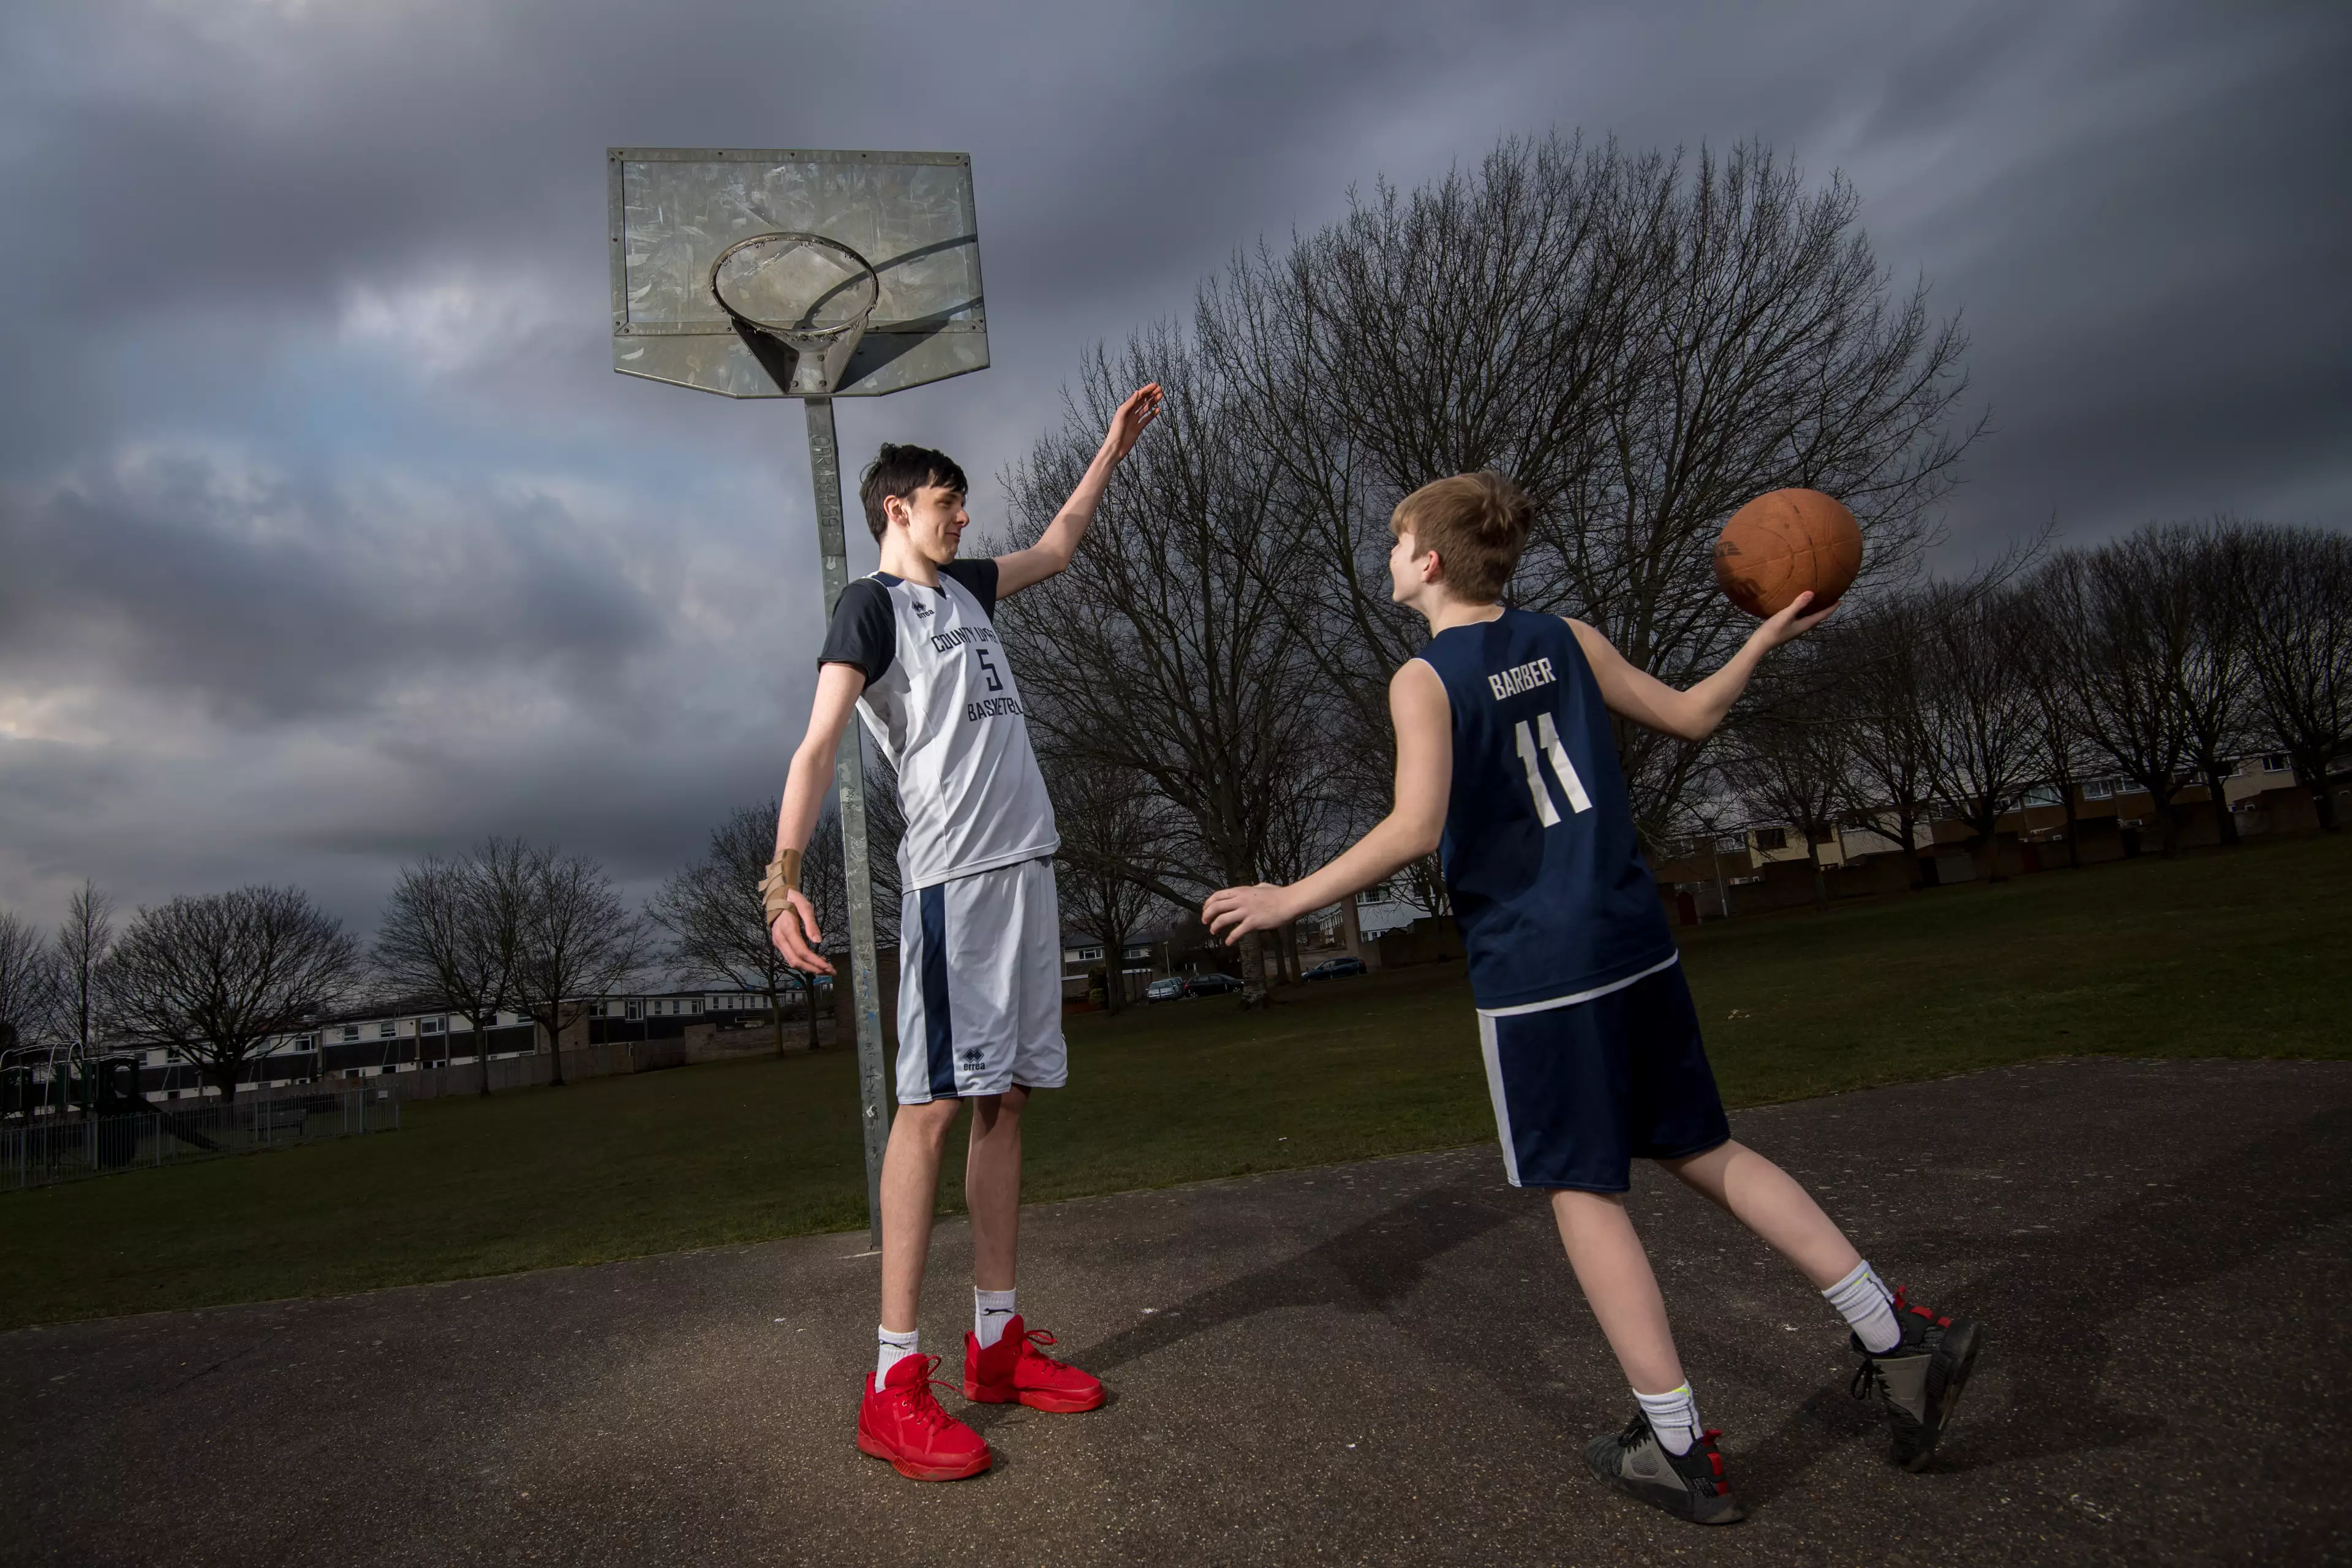 Seven Foot Brit May Be the Tallest Teen In The World